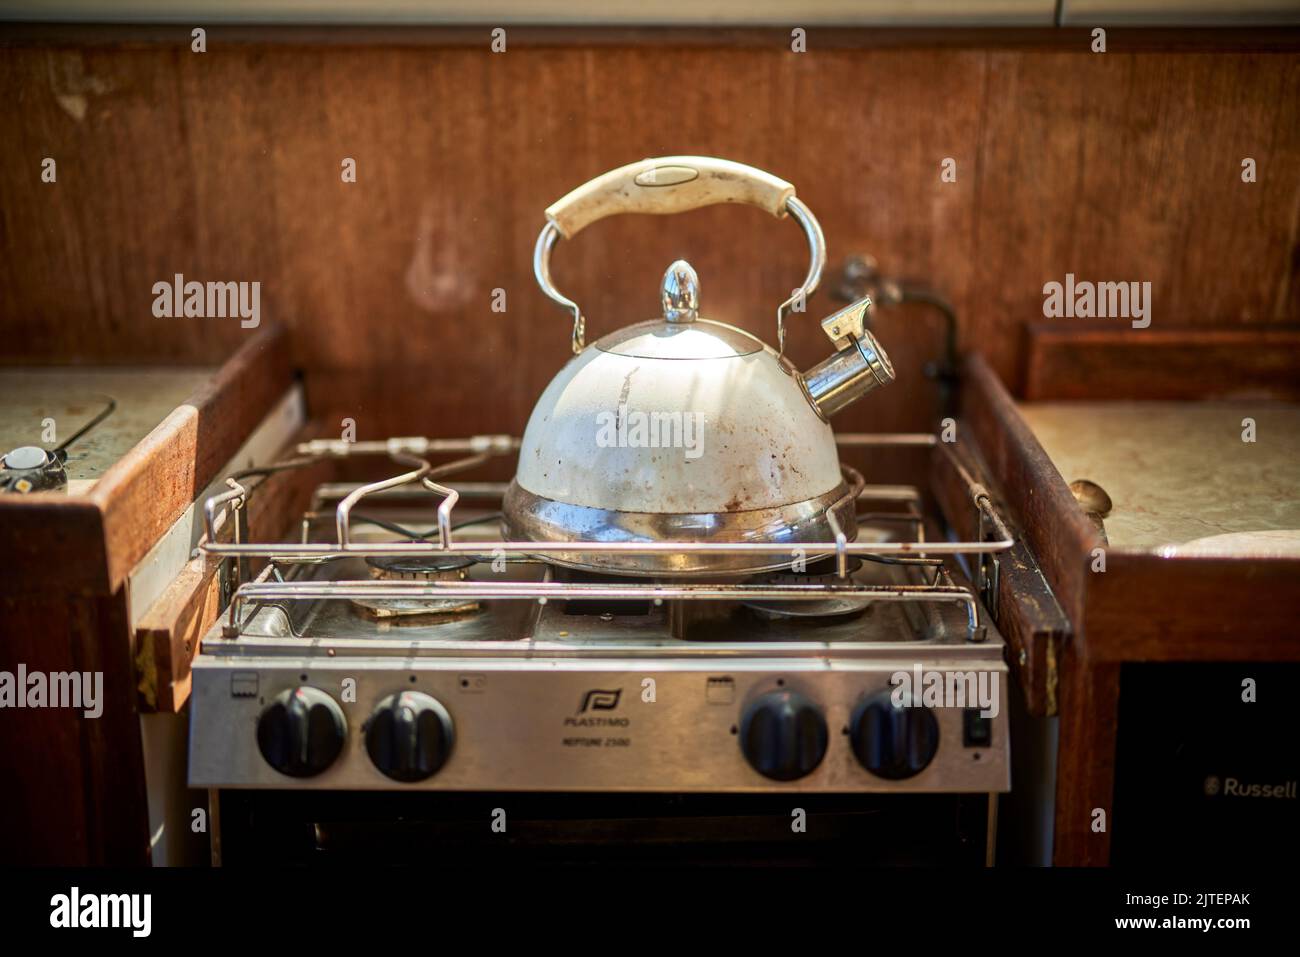 Small kitchen stove and kettle on a boat Stock Photo